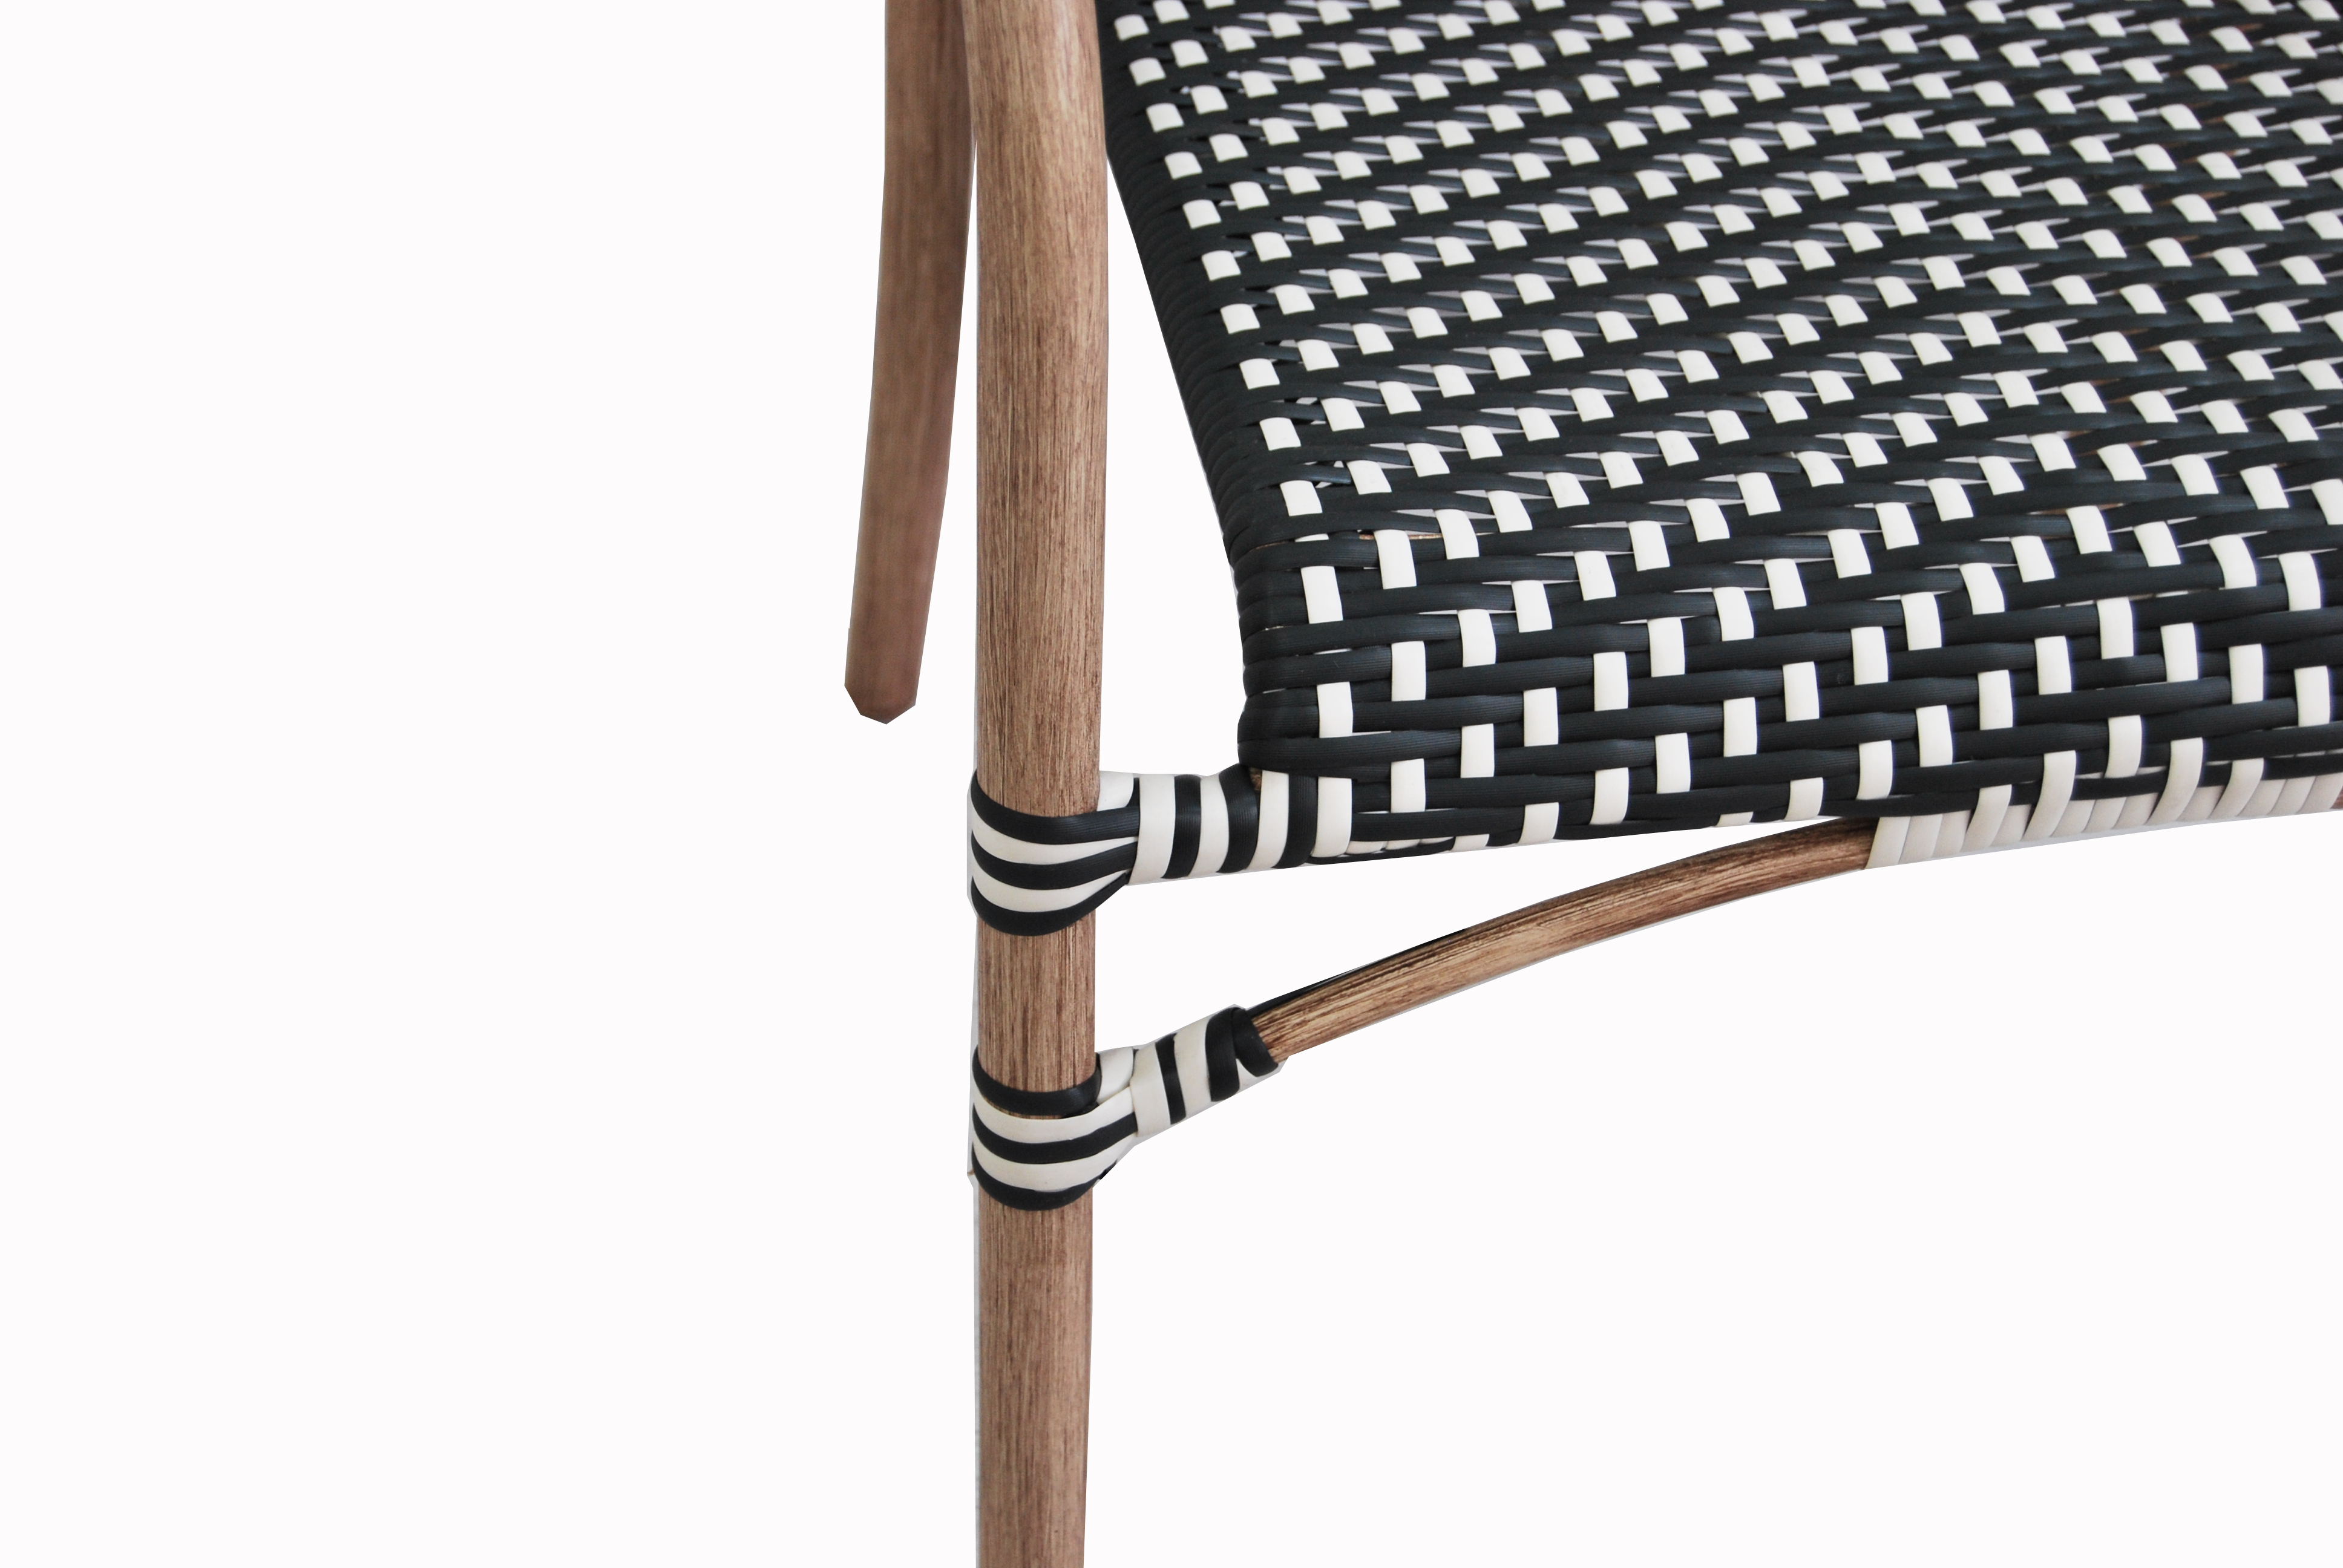 Better Homes & Gardens Parisian Bistro Dining Chair - image 5 of 6